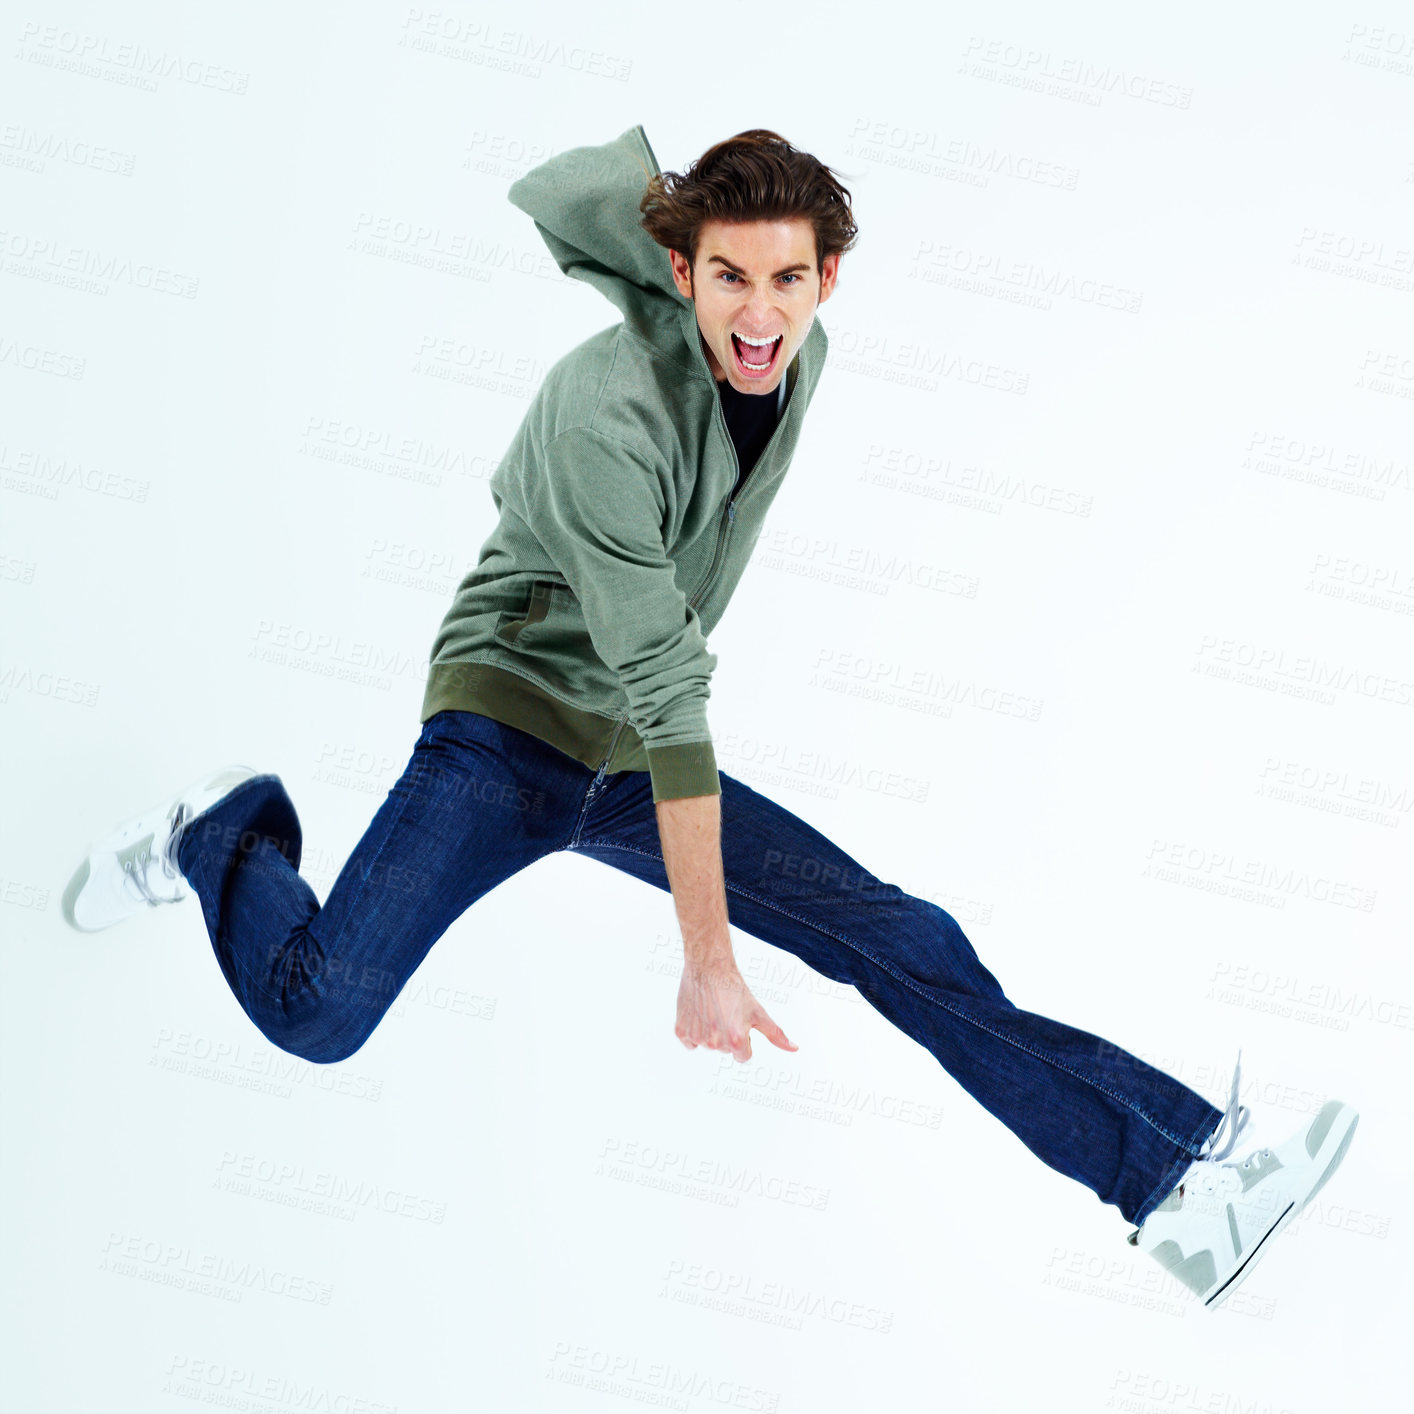 Buy stock photo Portrait of a young man jumping out and shouting loudly